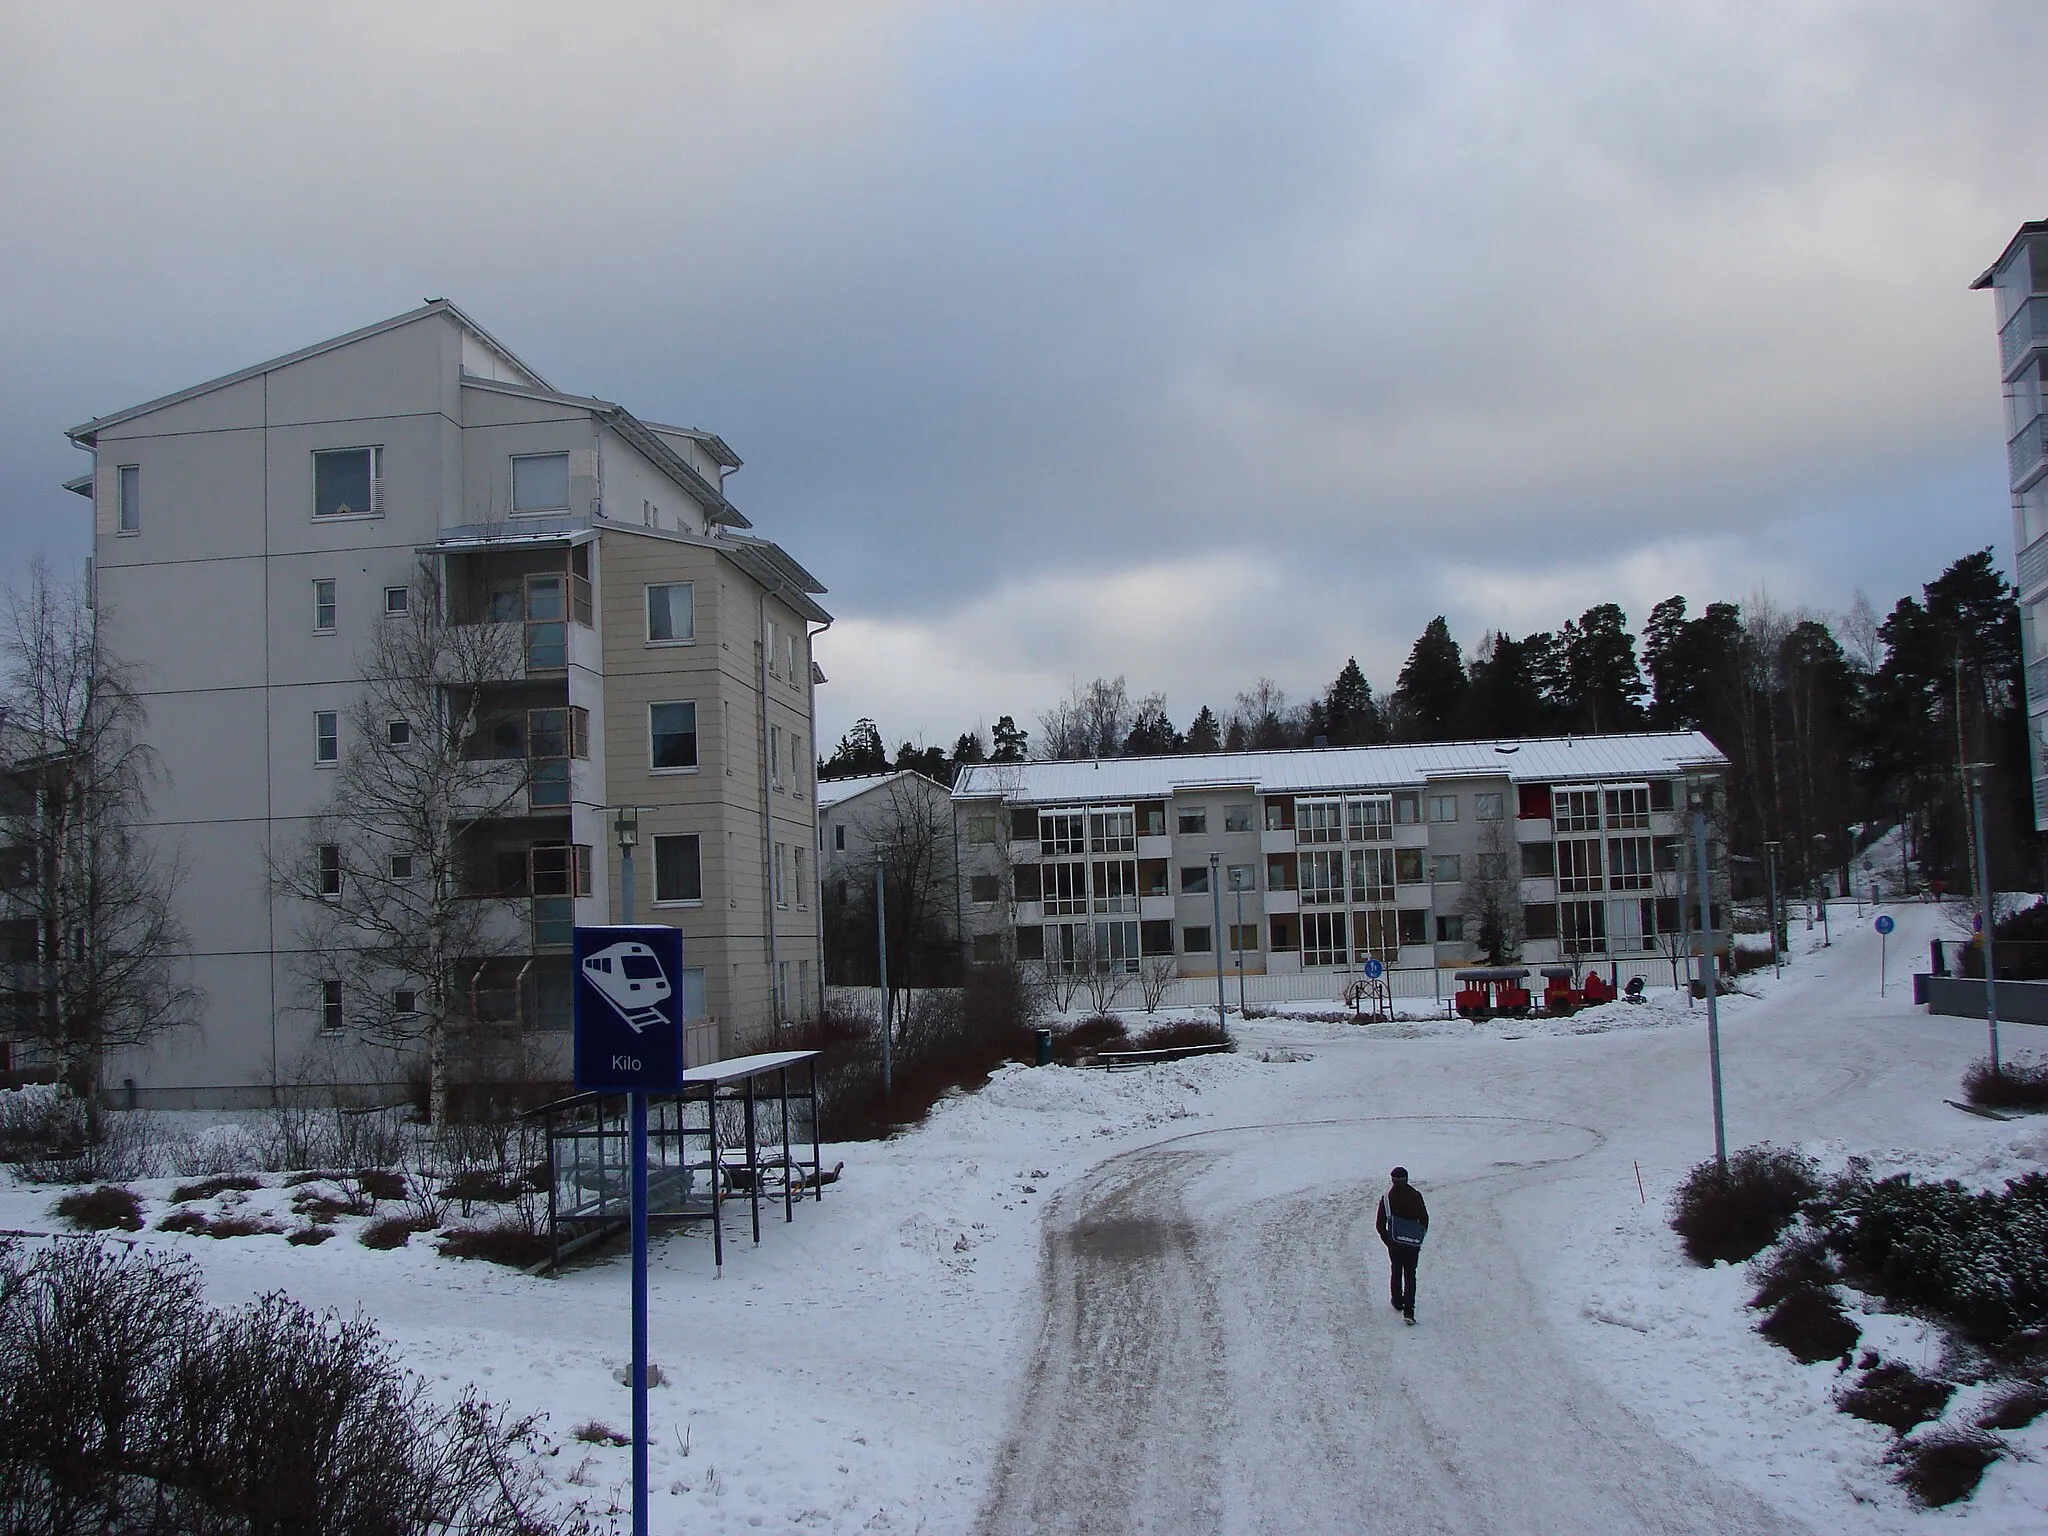 Photo showing: A view of Kilo, Espoo from the local train station.